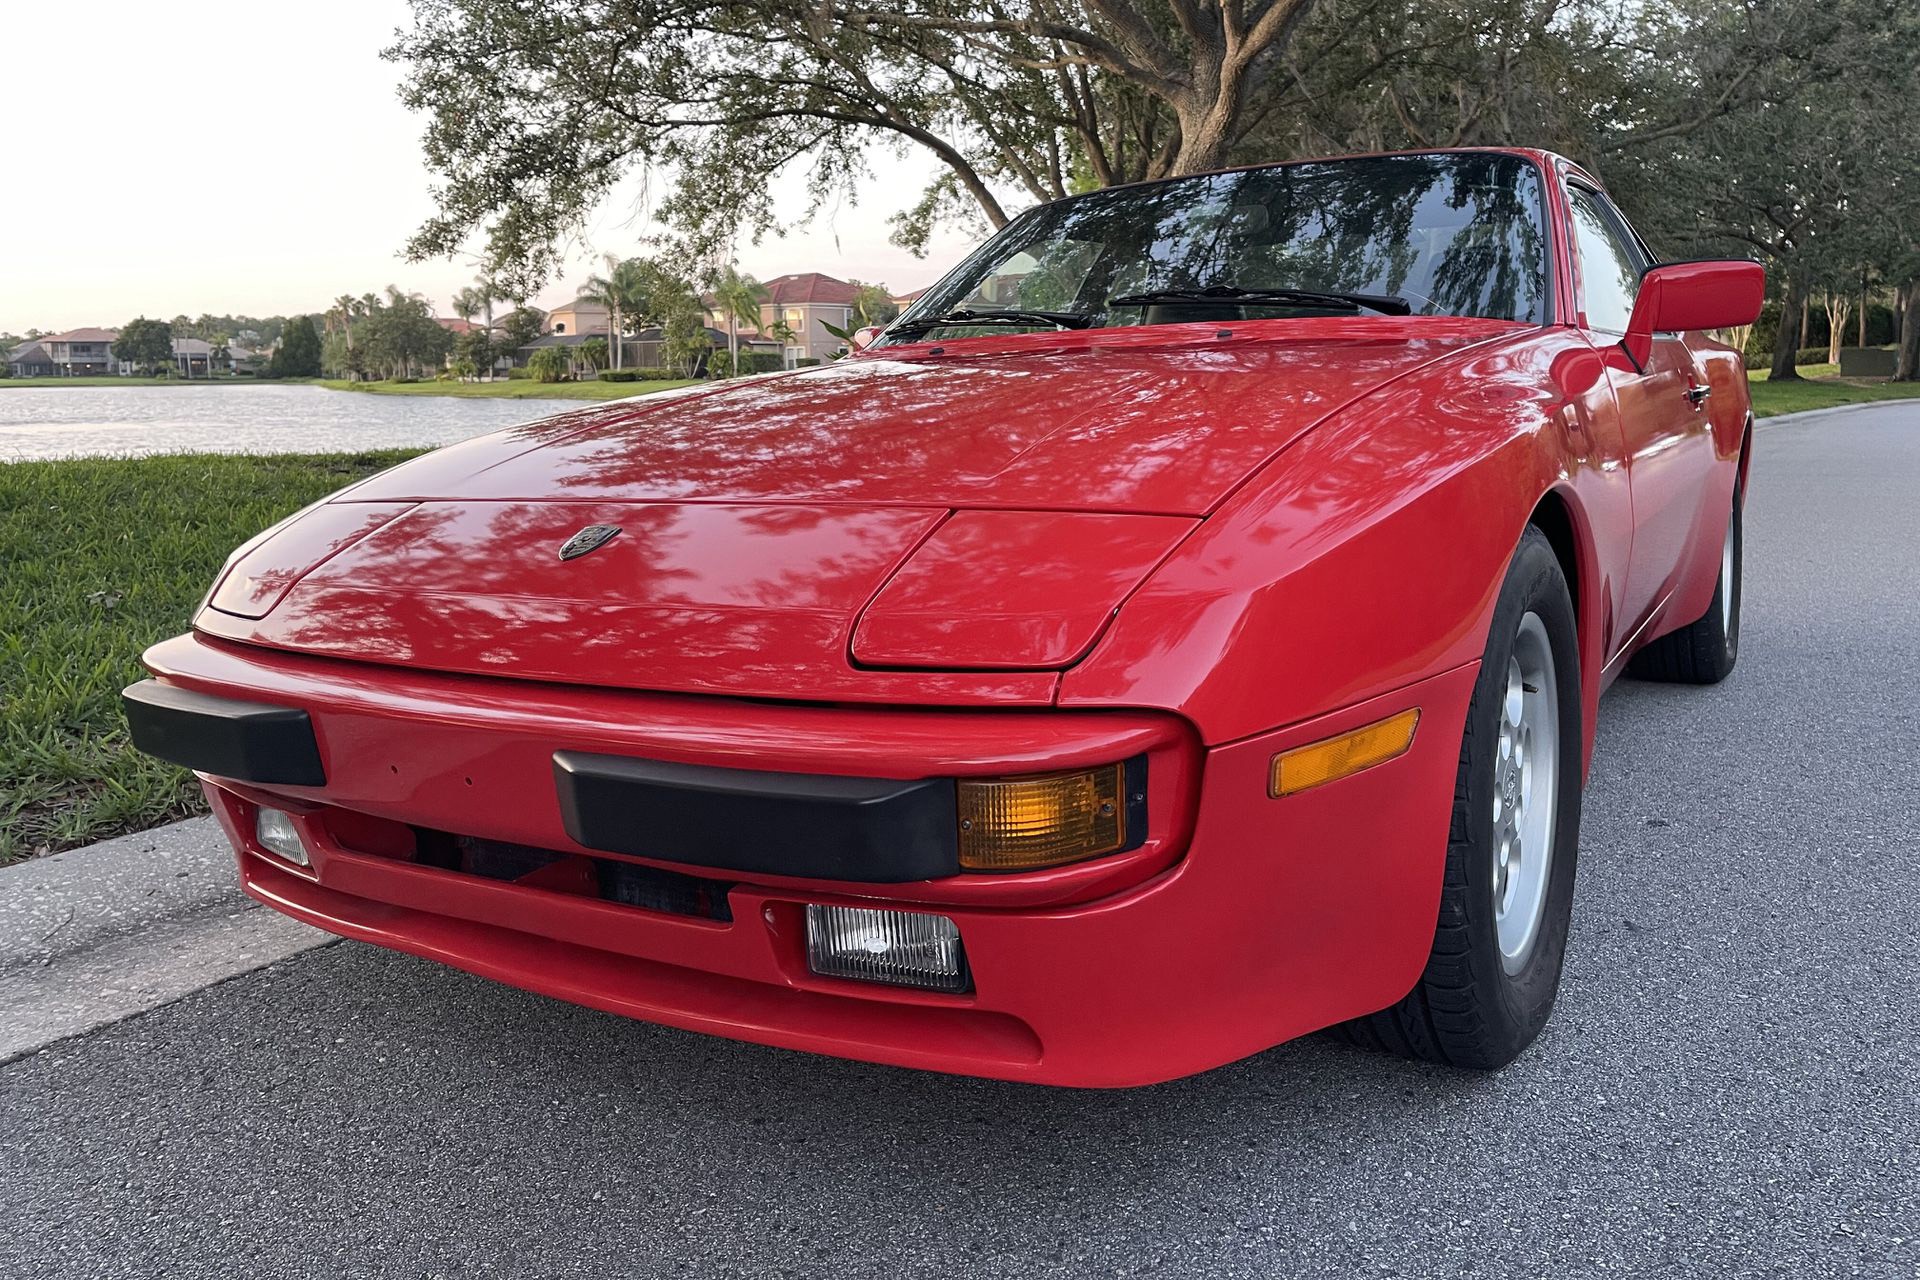 Was The Porsche 944 The Best-Handling Sports Car Of The 1980s?